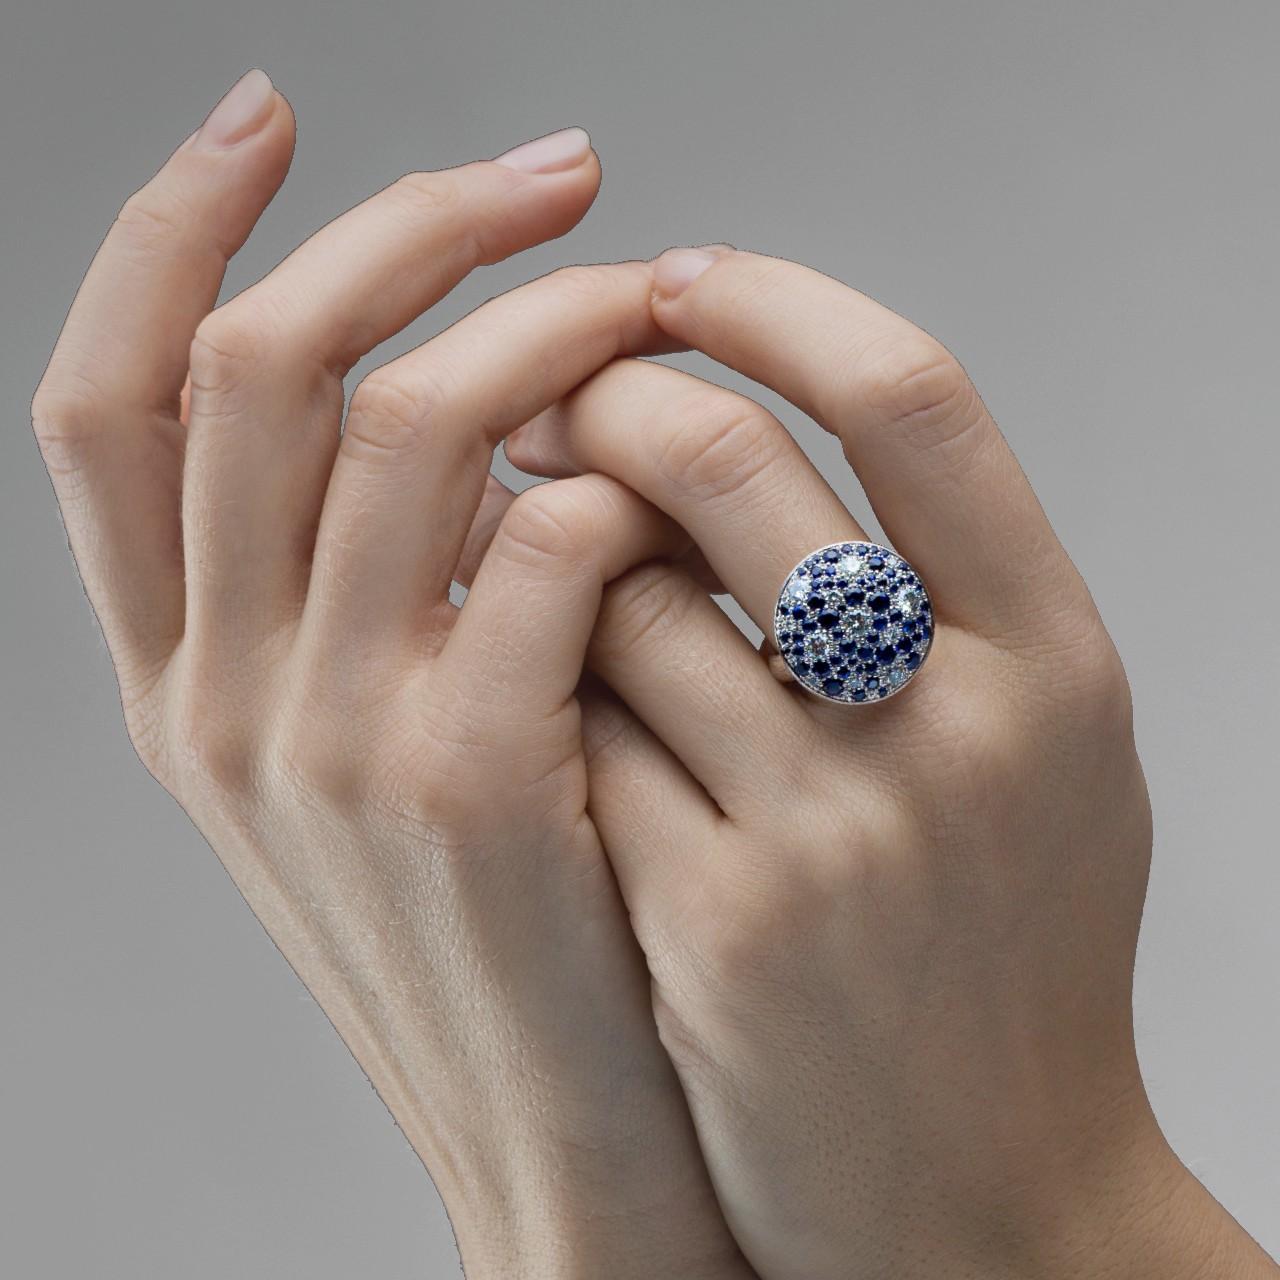 Alex Jona design collection, hand crafted in Italy, 18k white gold pavé ring by Jona featuring 1.95 carats of blue sapphires and 0.80 carats of white diamonds, F color, VVS1 clarity; ring size 7 (can be sized). 

Alex Jona jewels stand out, not only